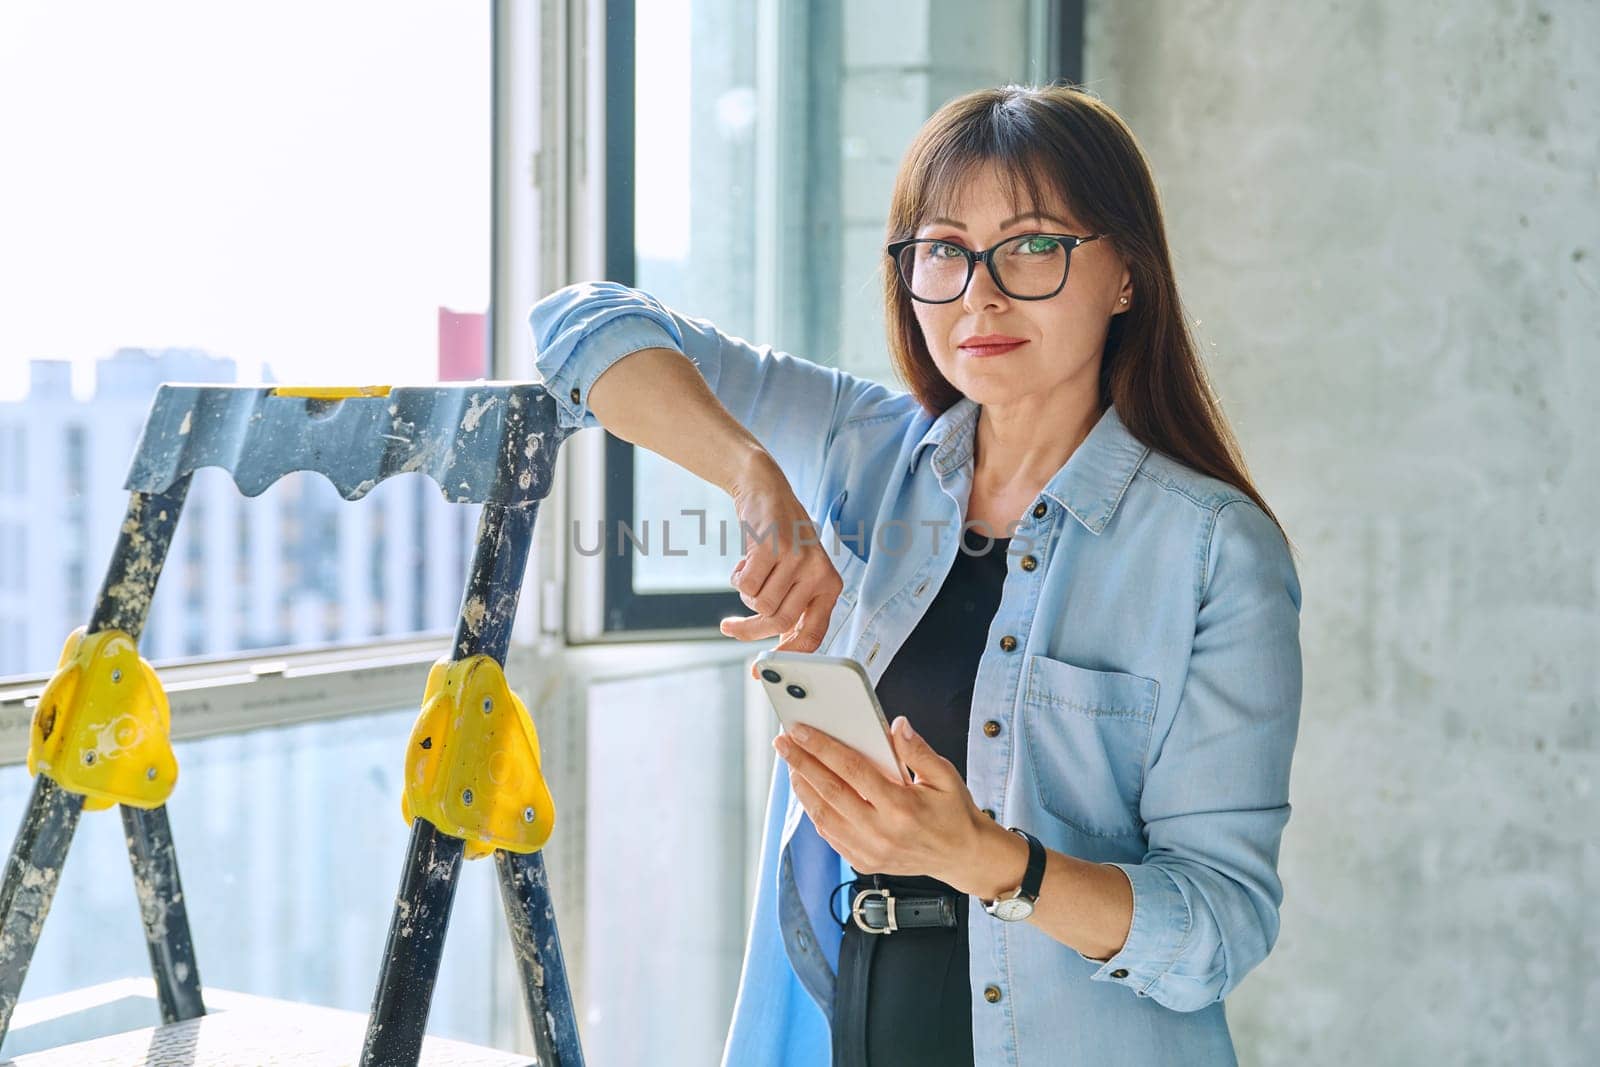 Female decorator designer, repair manager, organizer of final finishing and decor with smartphone, looking at camera in new apartment office. Repair, decoration, work, people concept